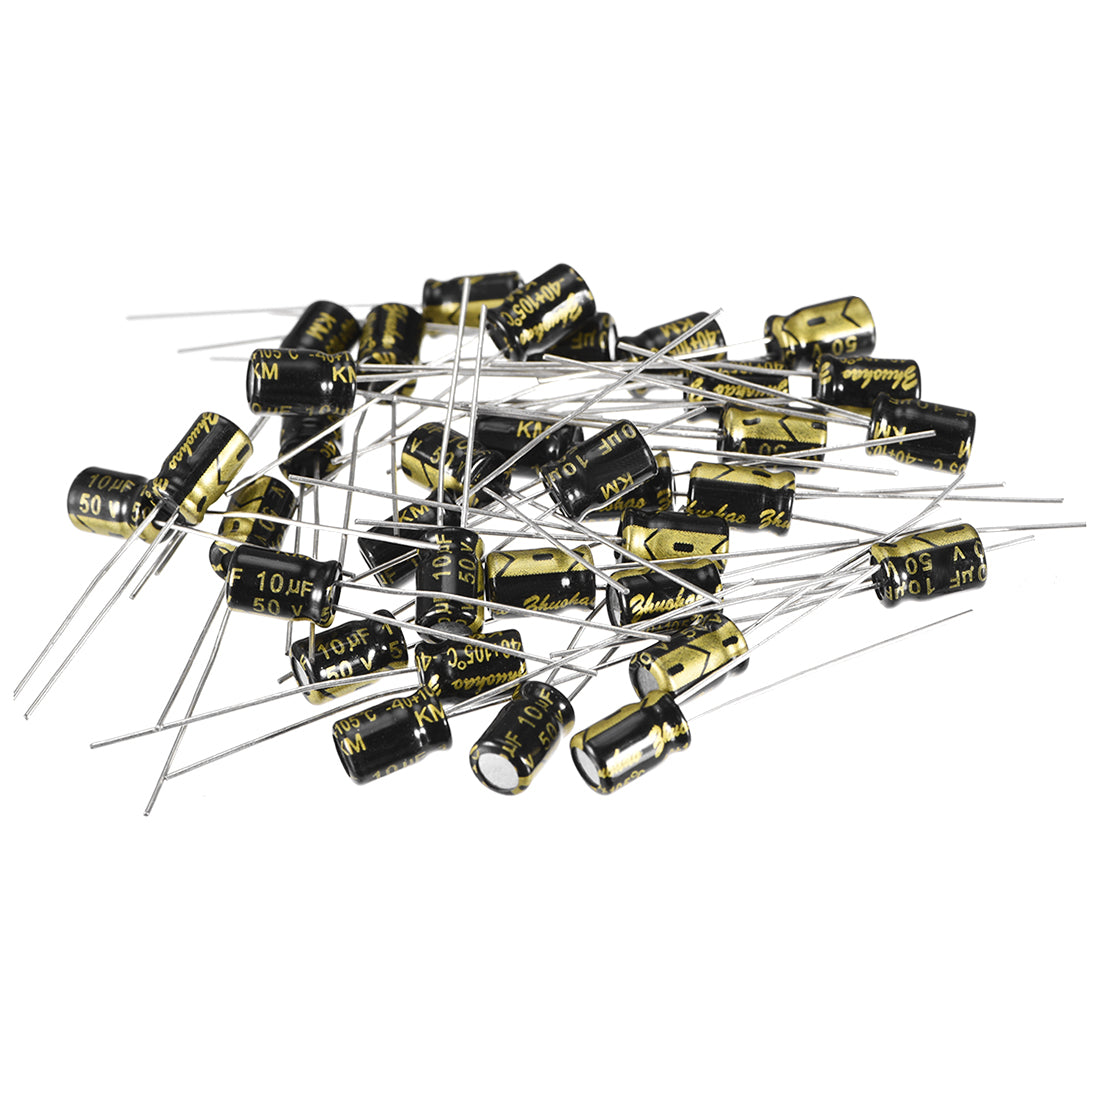 uxcell Uxcell Aluminum Radial Electrolytic Capacitor with 10uF 50V 105 Celsius Life 2000H 5 x 7 mm Black 30pcs